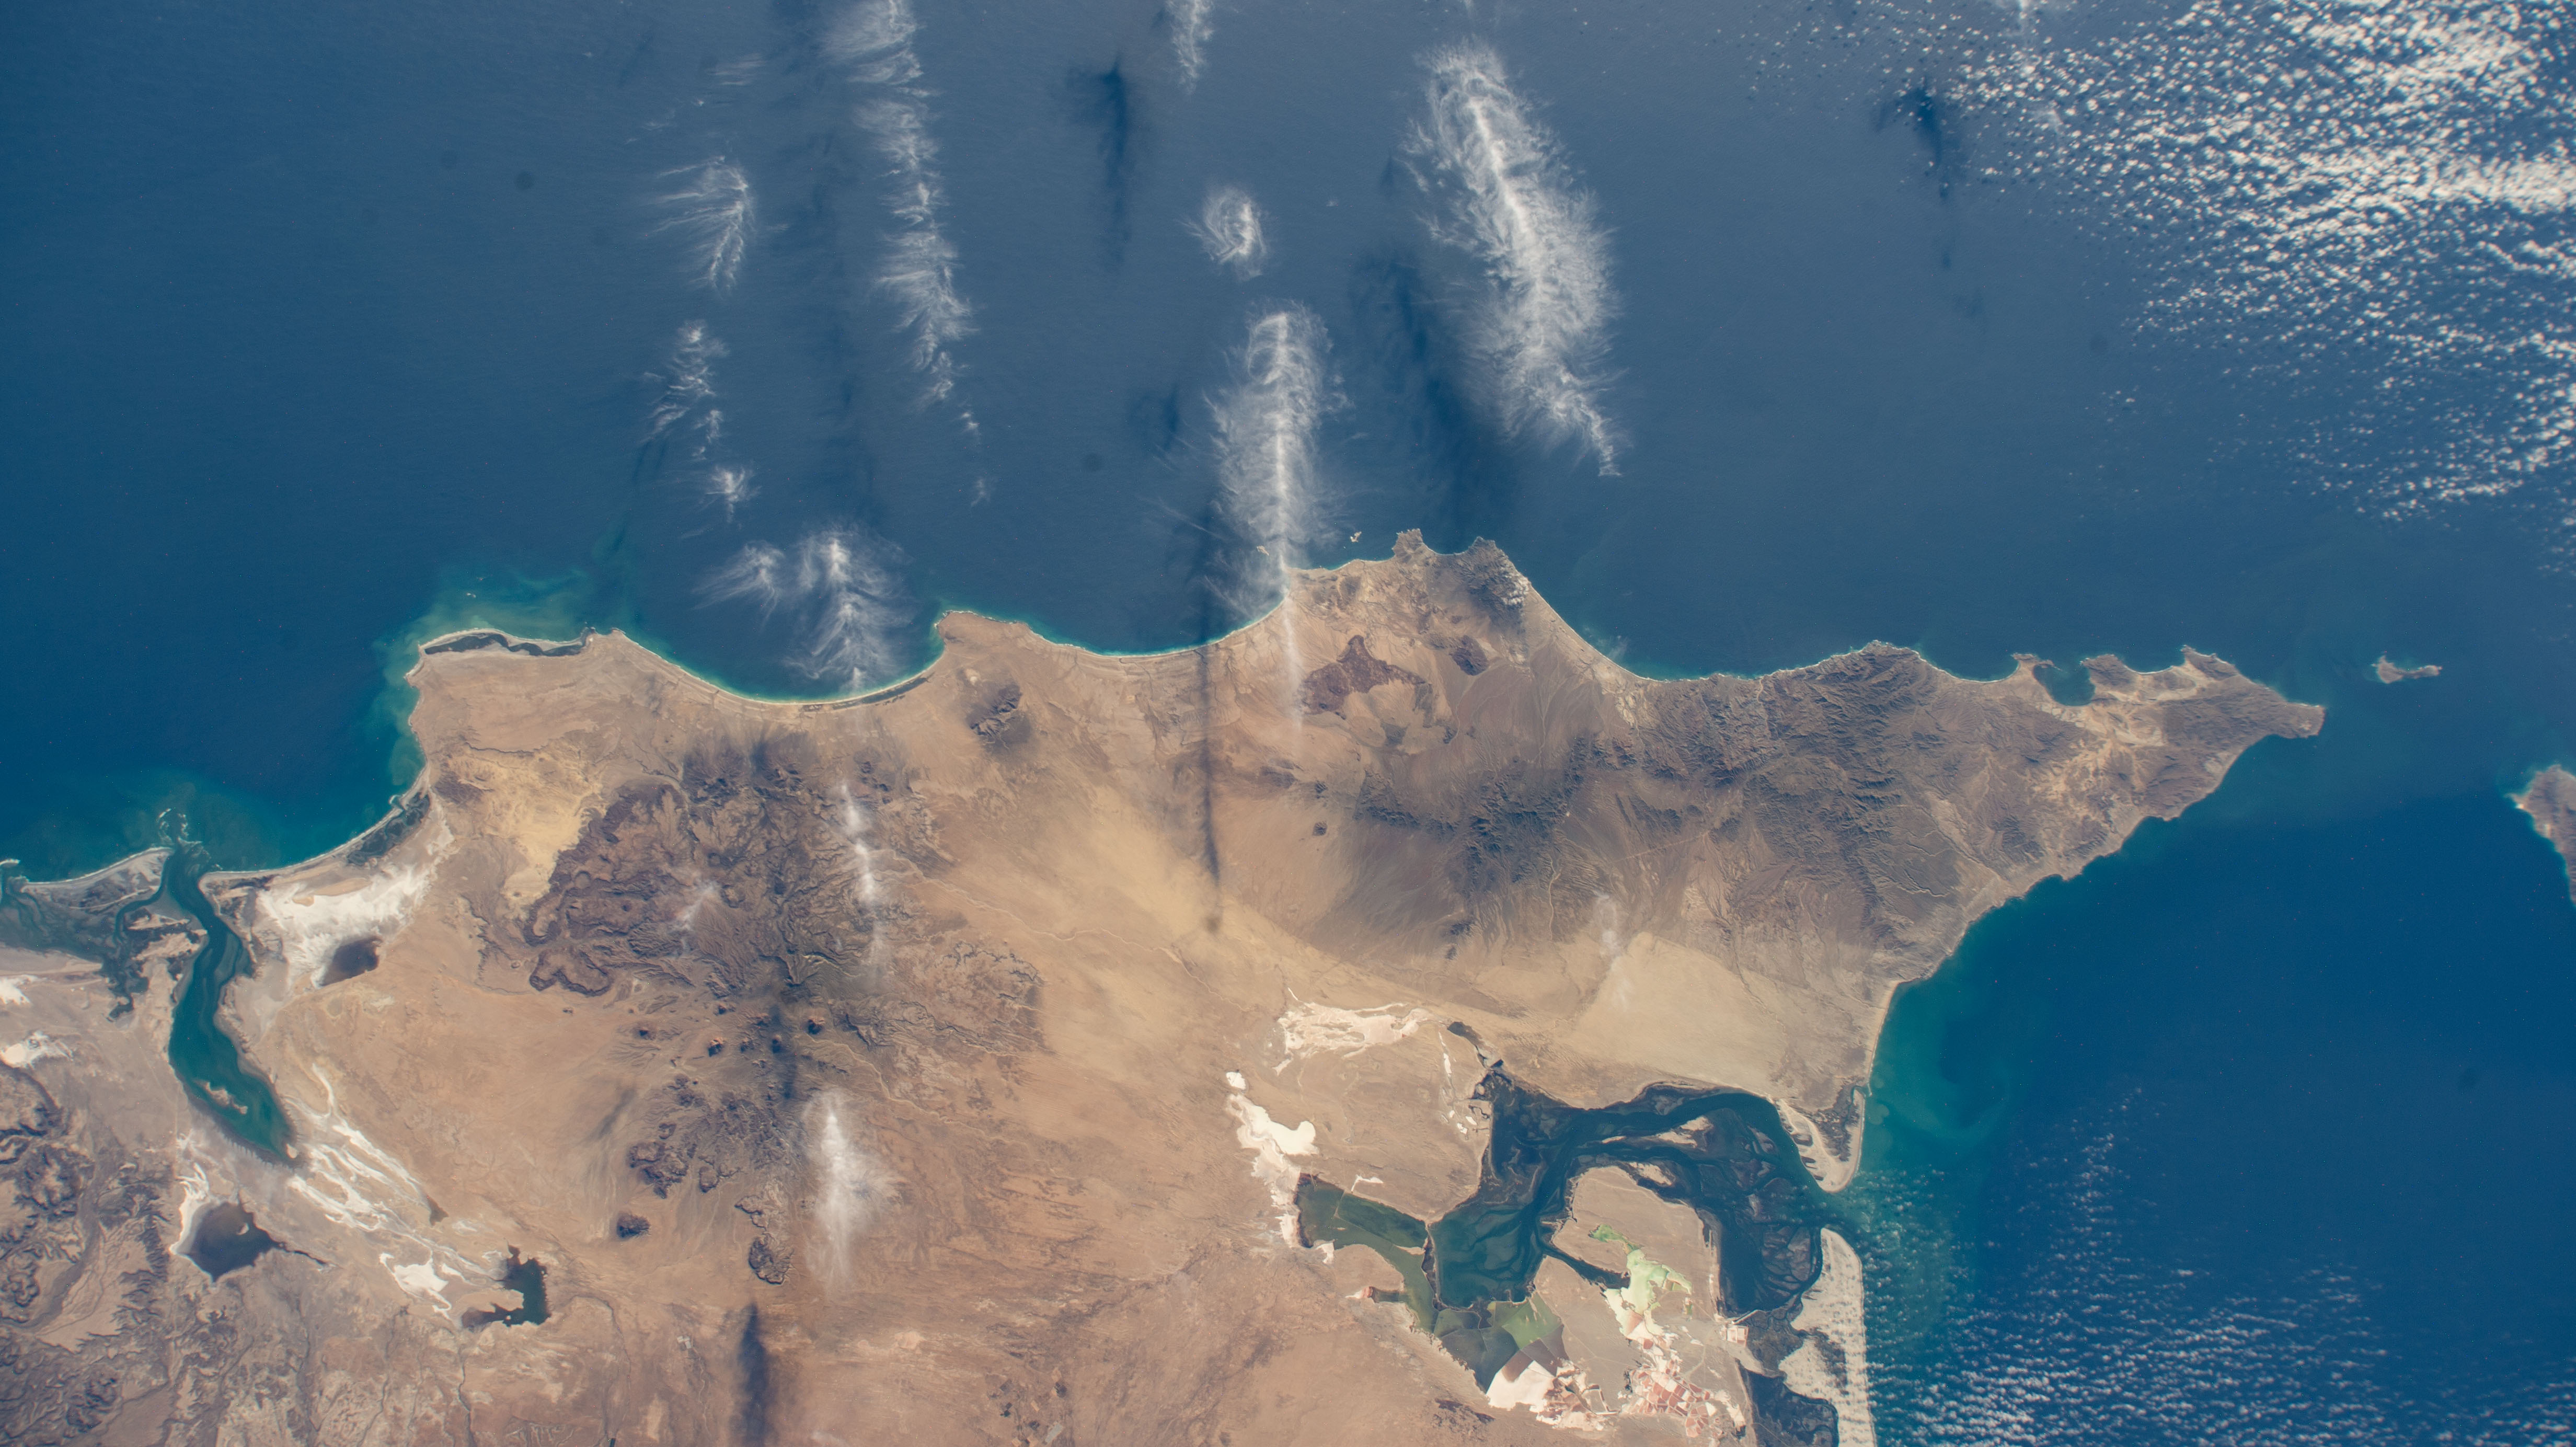 The north coast of the Mexican state of Baja California Sur on the Pacific Ocean is pictured from the International Space Station as it orbited 258 miles above. The land is brown, with some smaller bodies of water. The northern coastline is scalloped. A few streaks of clouds stretch across land and water, but the sky is mostly cloudless.